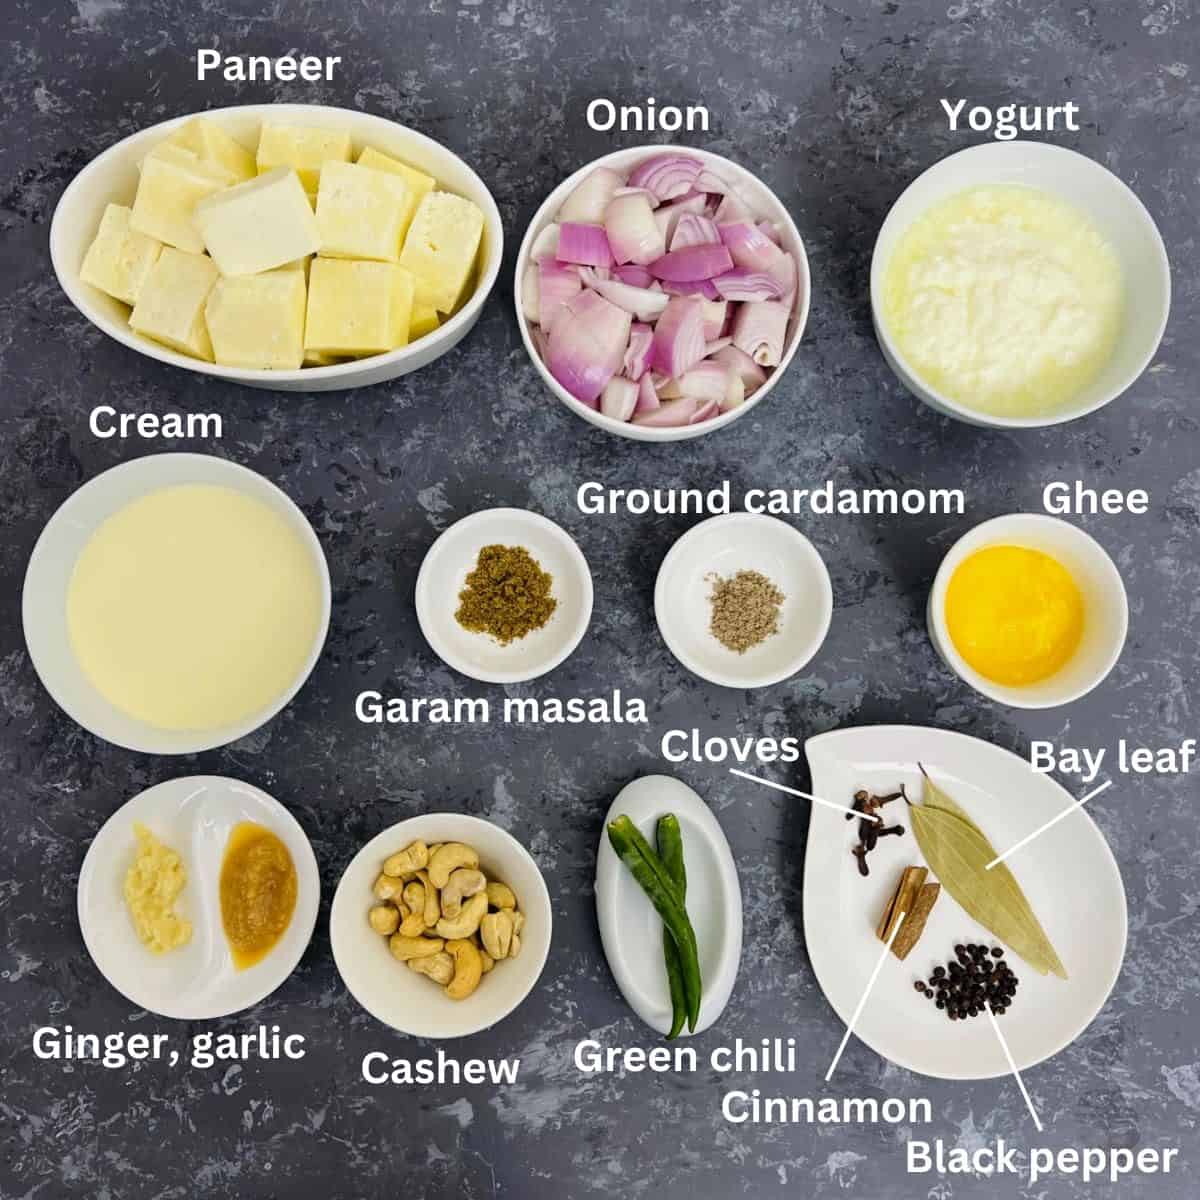 Ingredients to make shahi paneer placed on a grey surface.